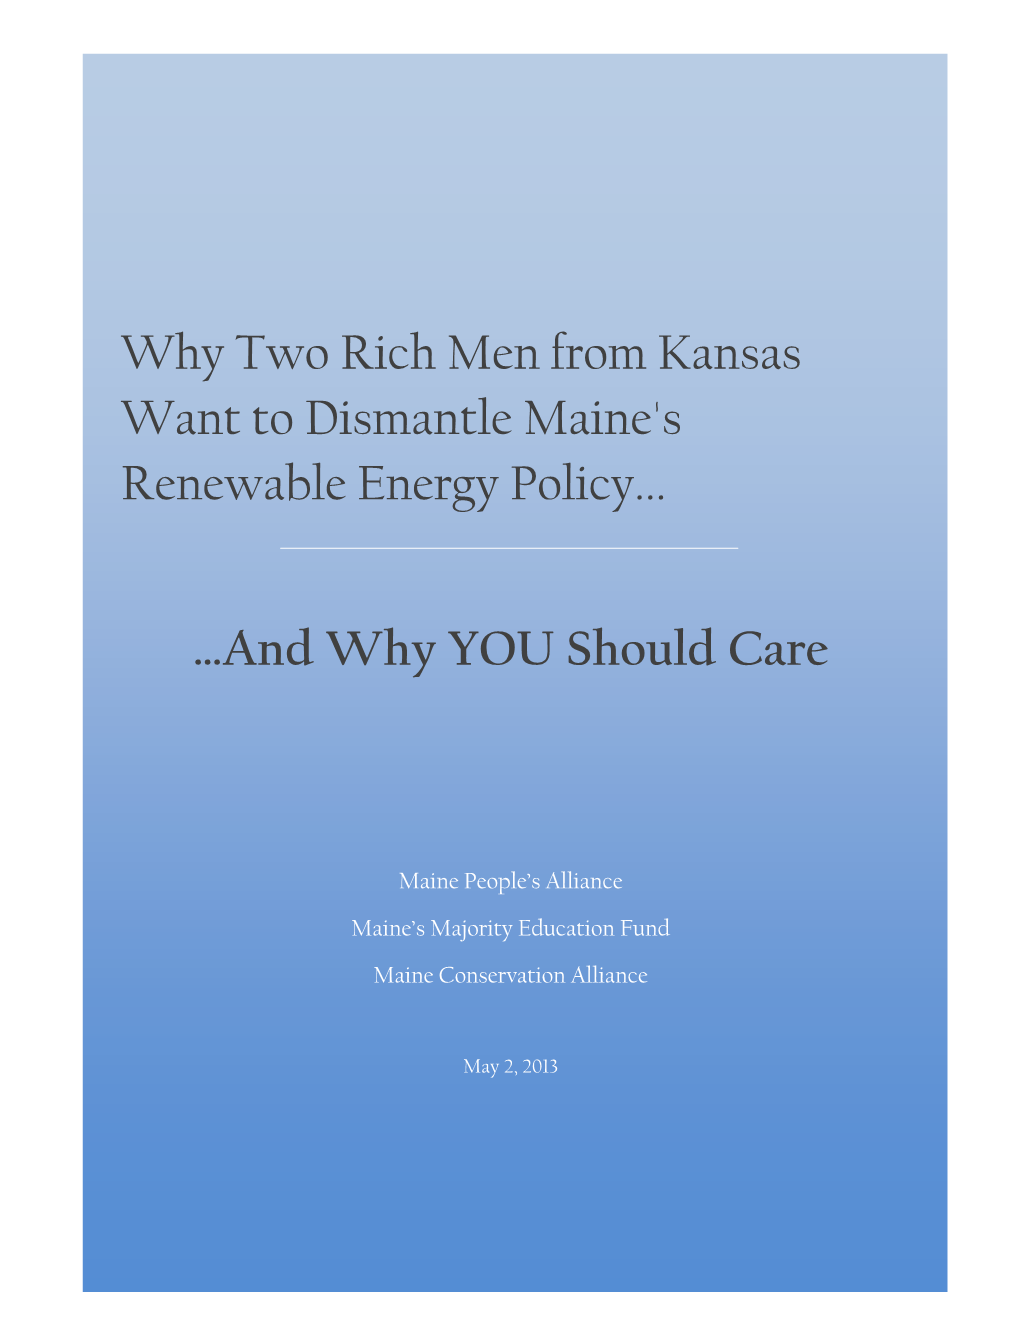 Are We Debating Renewable Energy Or the Koch Brothers’ Profits?